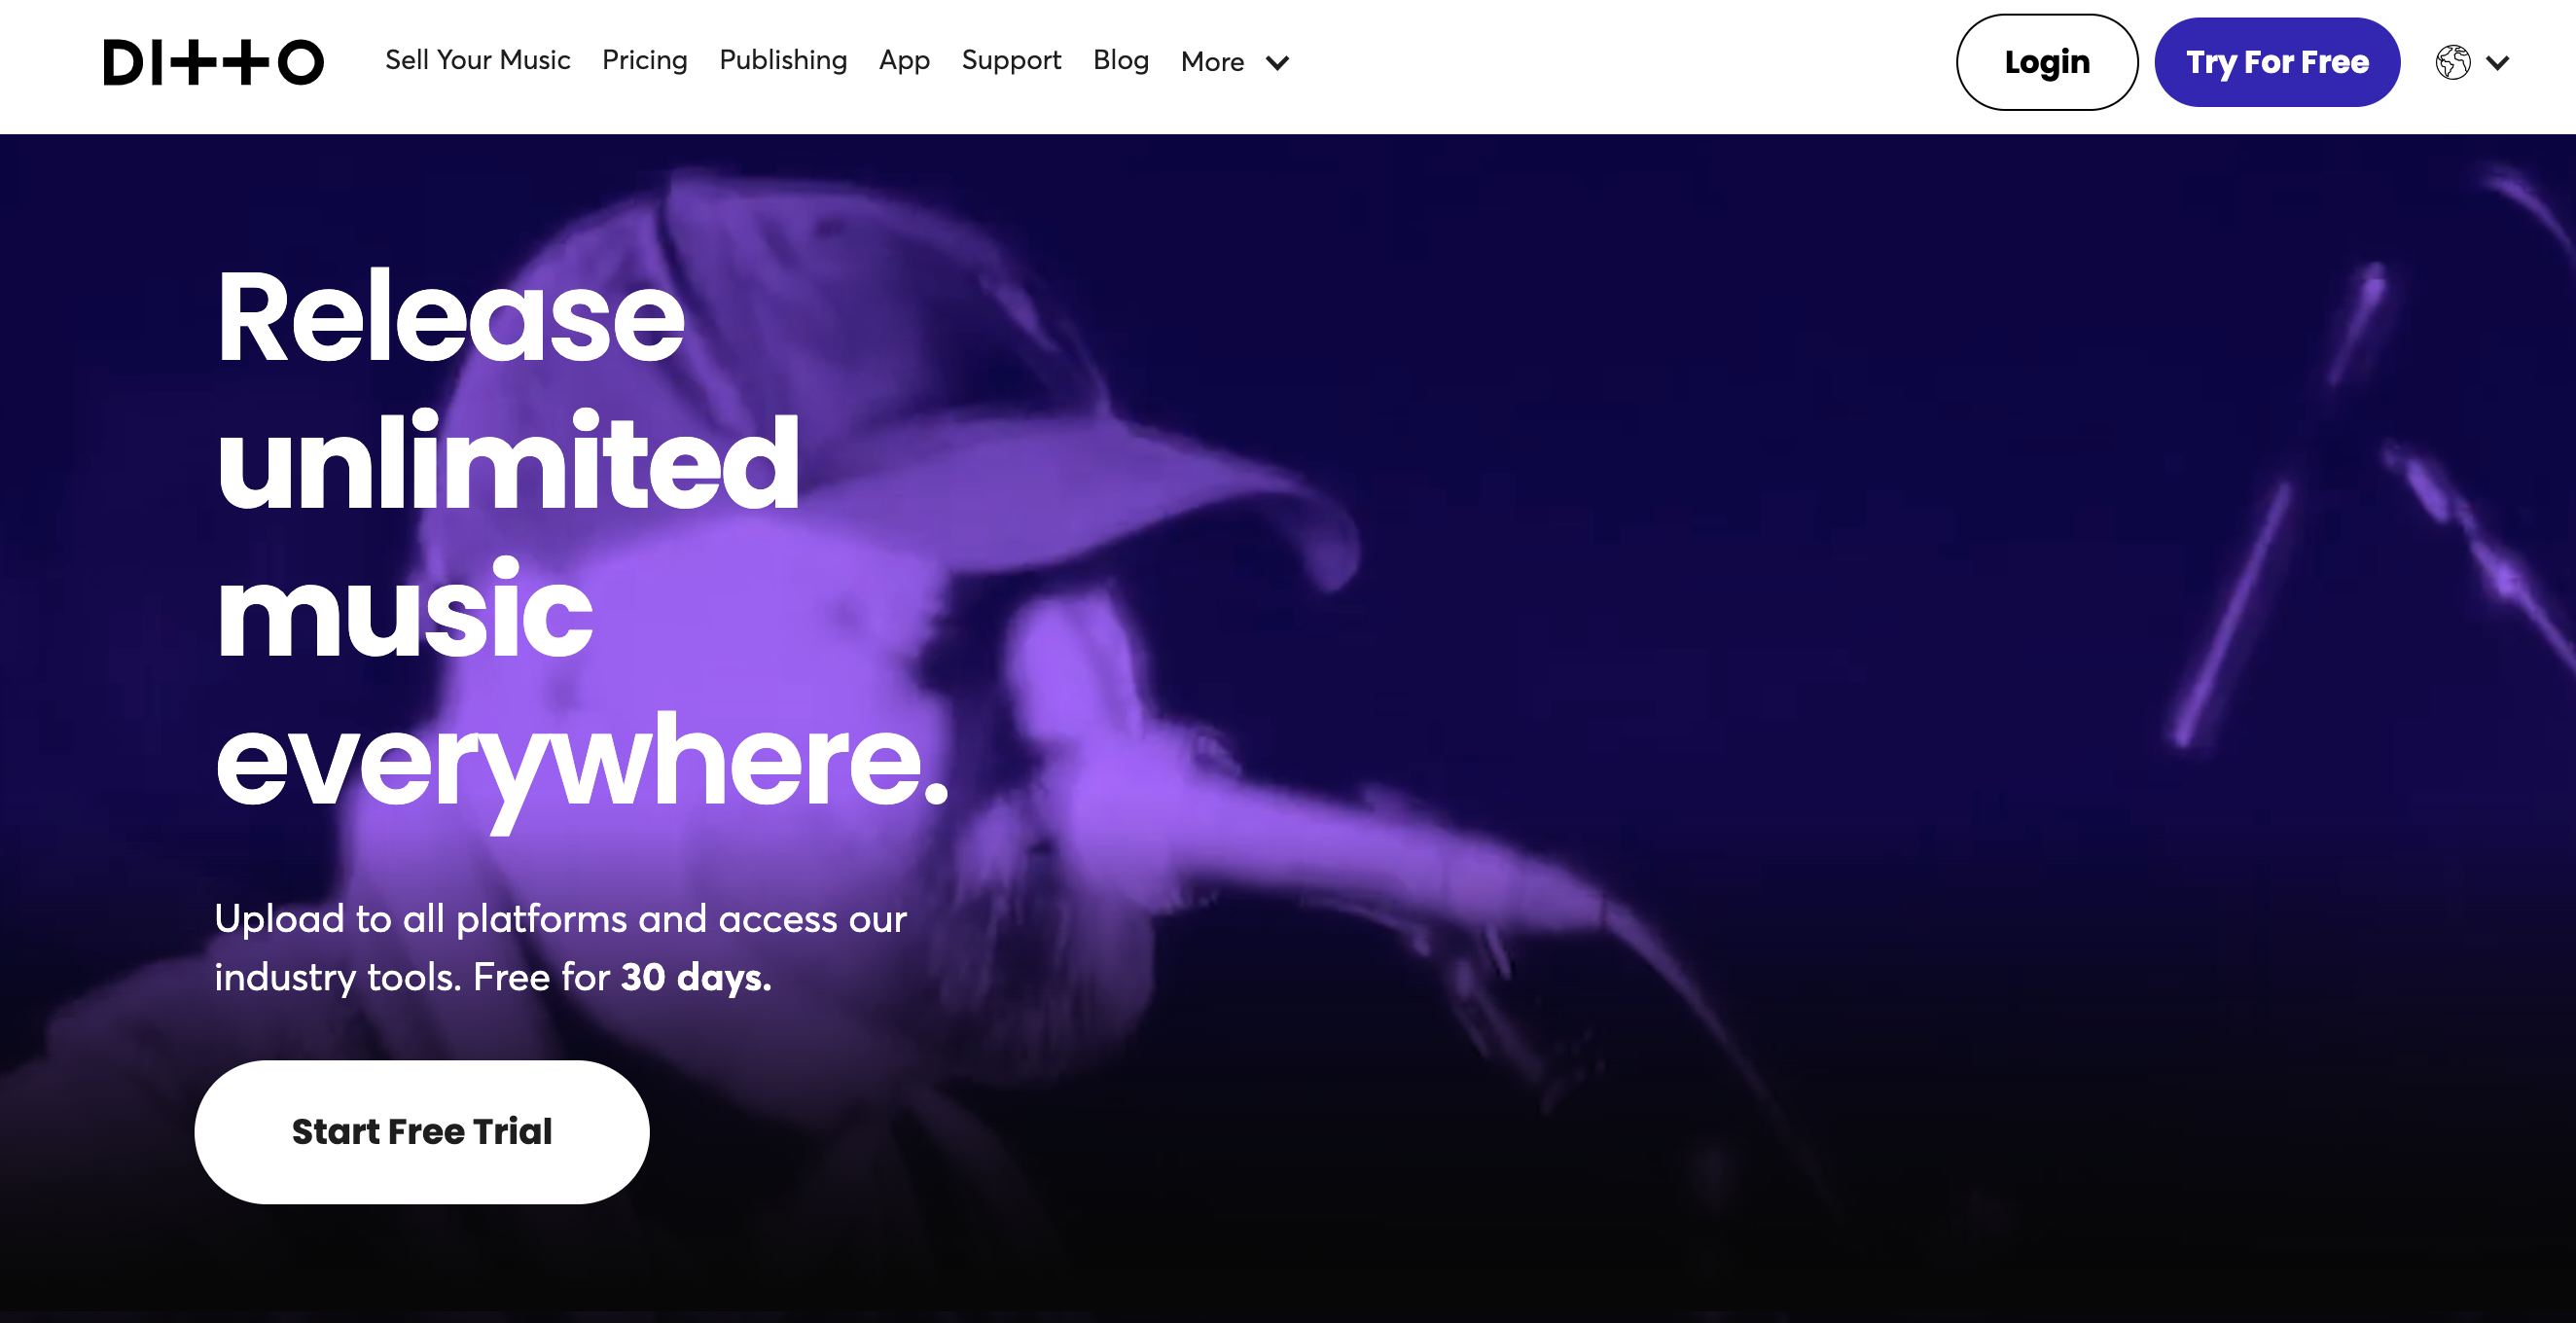 screenshot of the webpage of Ditto, a music distribution service offering a free trial to release unlimited music and get paid to write song lyrics.